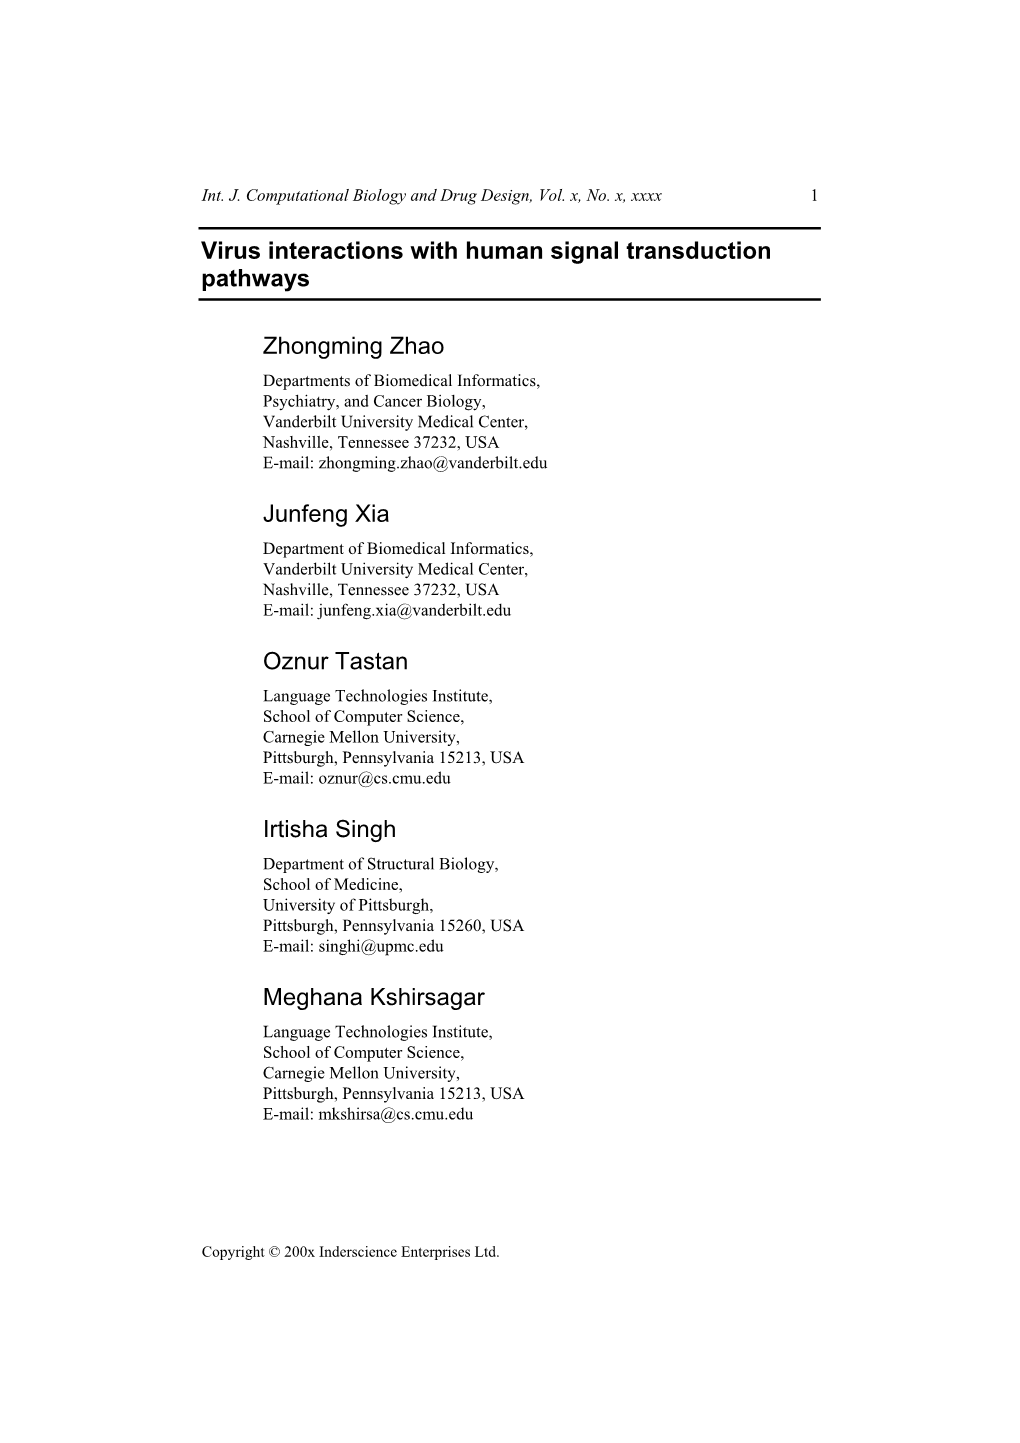 Virus Interactions with Human Signal Transduction Pathways